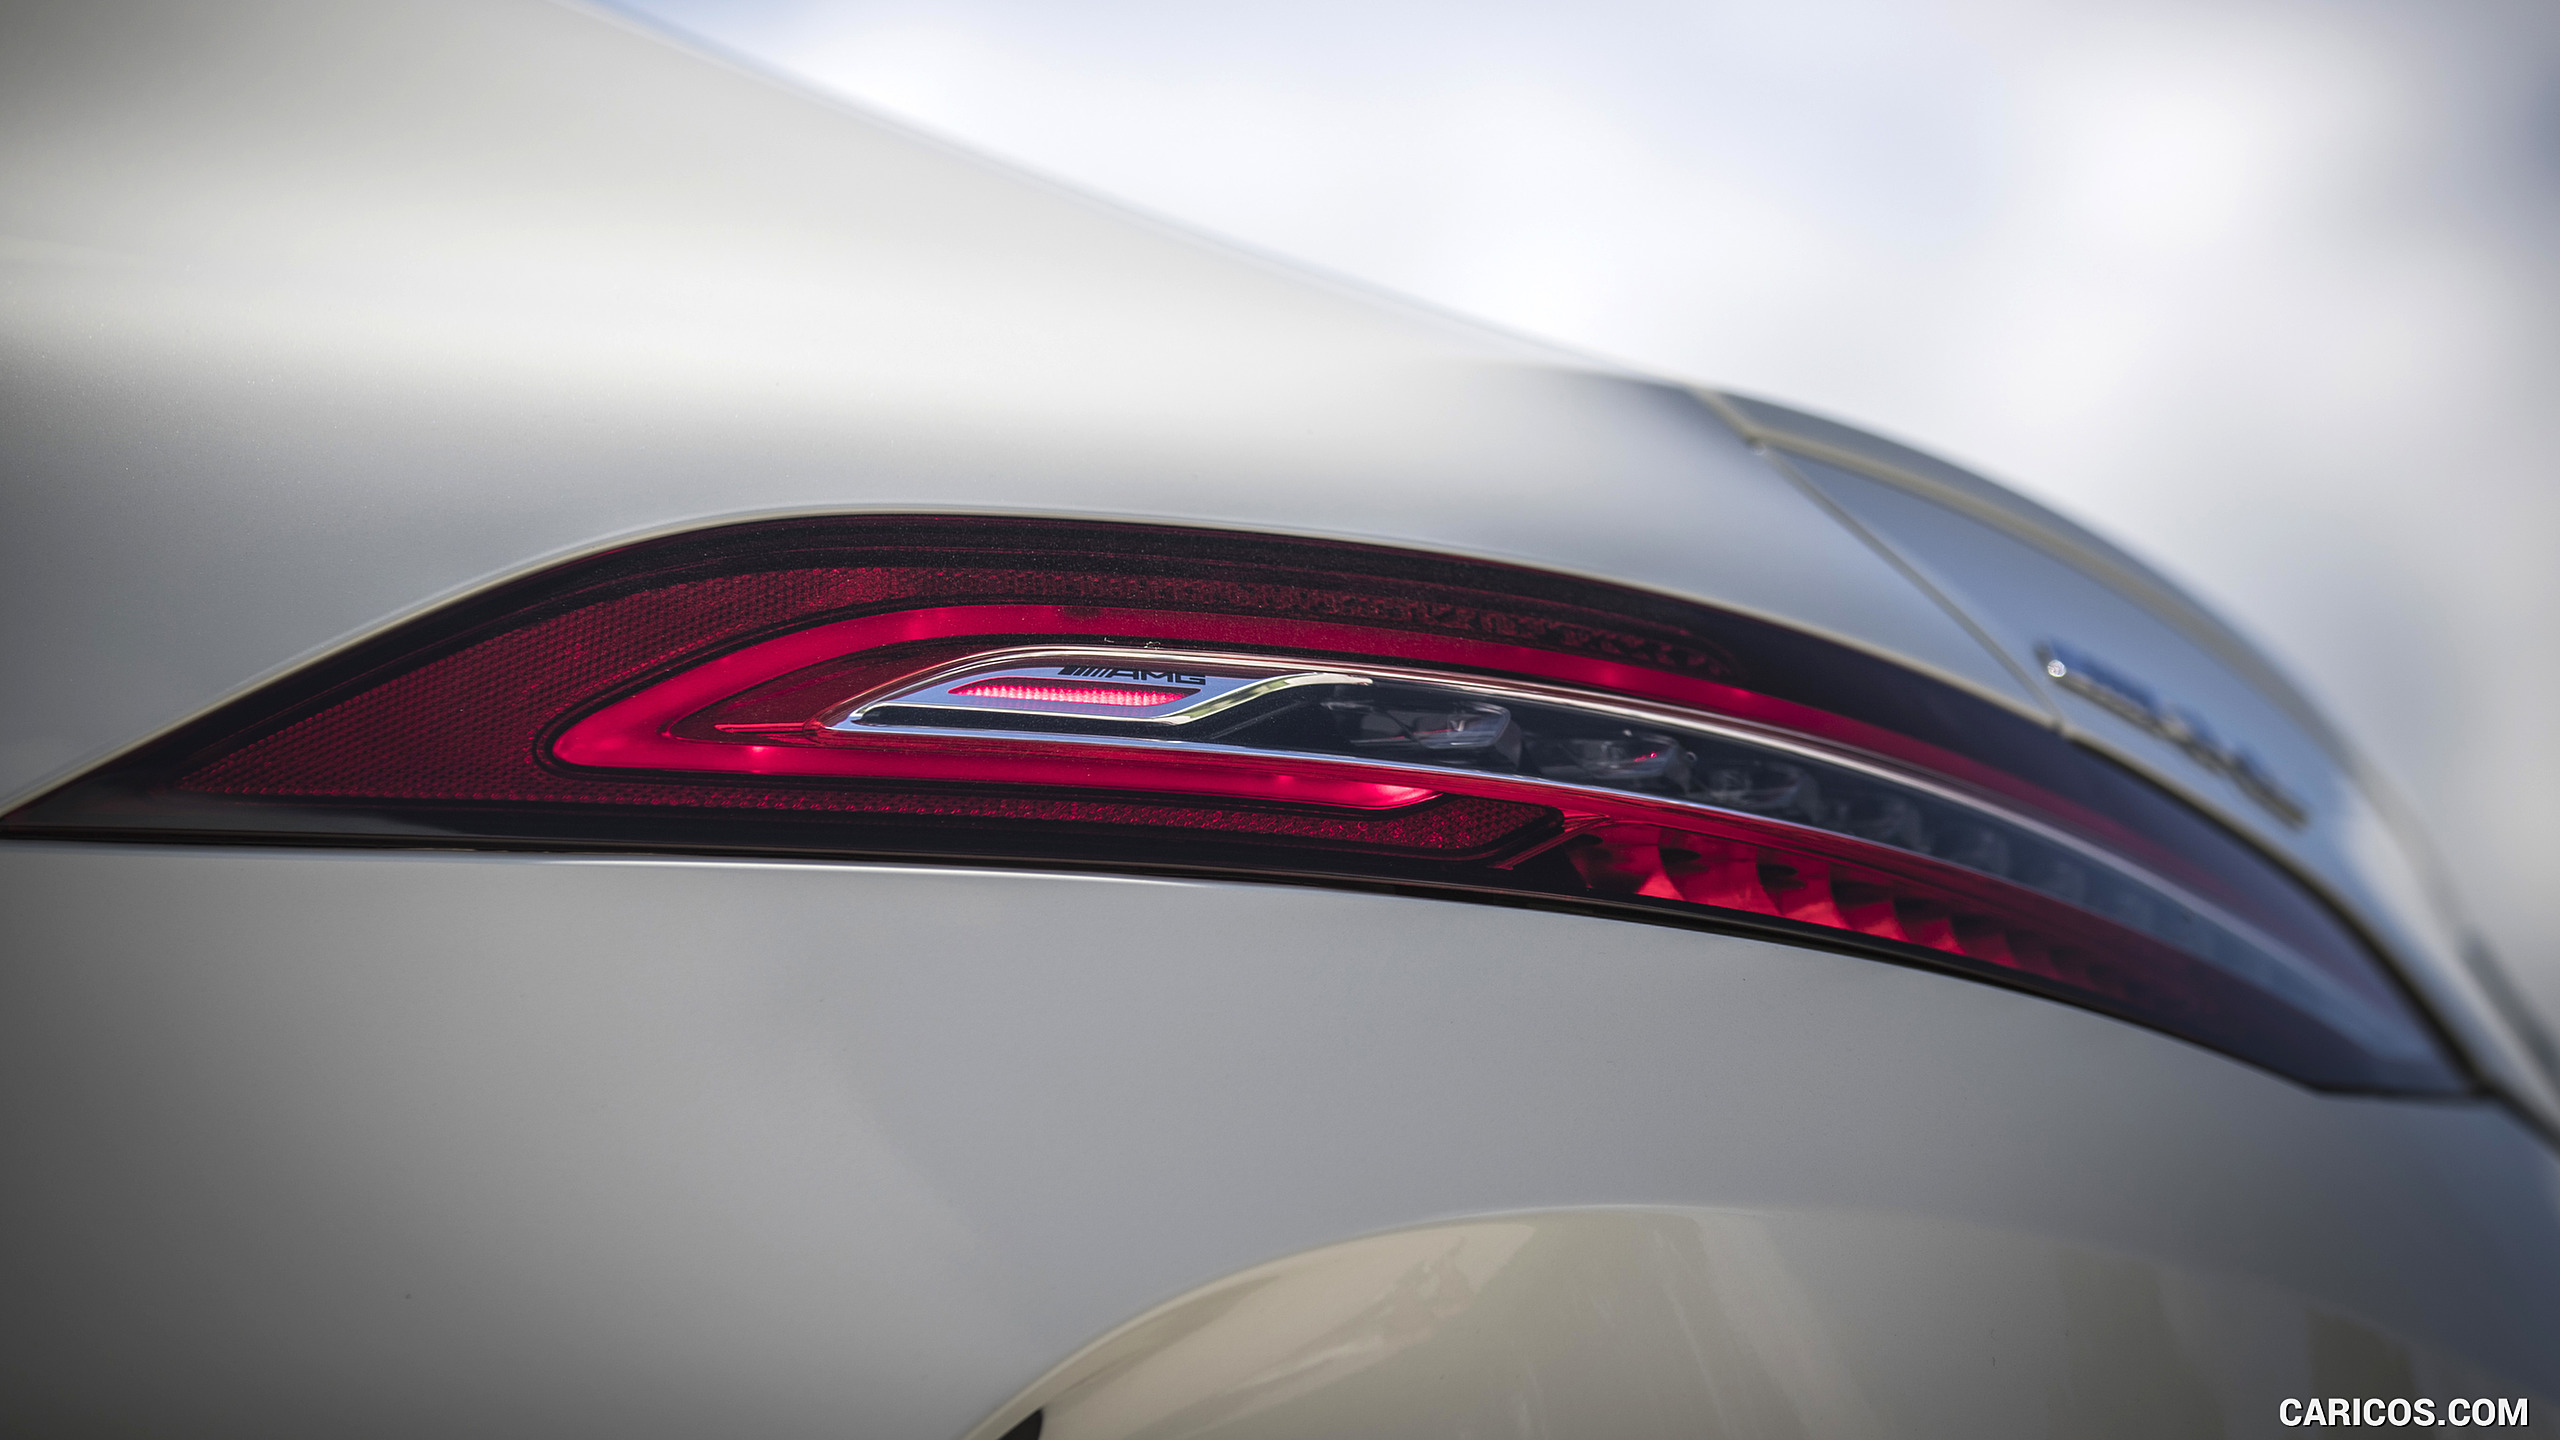 2019 Mercedes-AMG GT 53 4-Door Coupe - Tail Light, #275 of 427